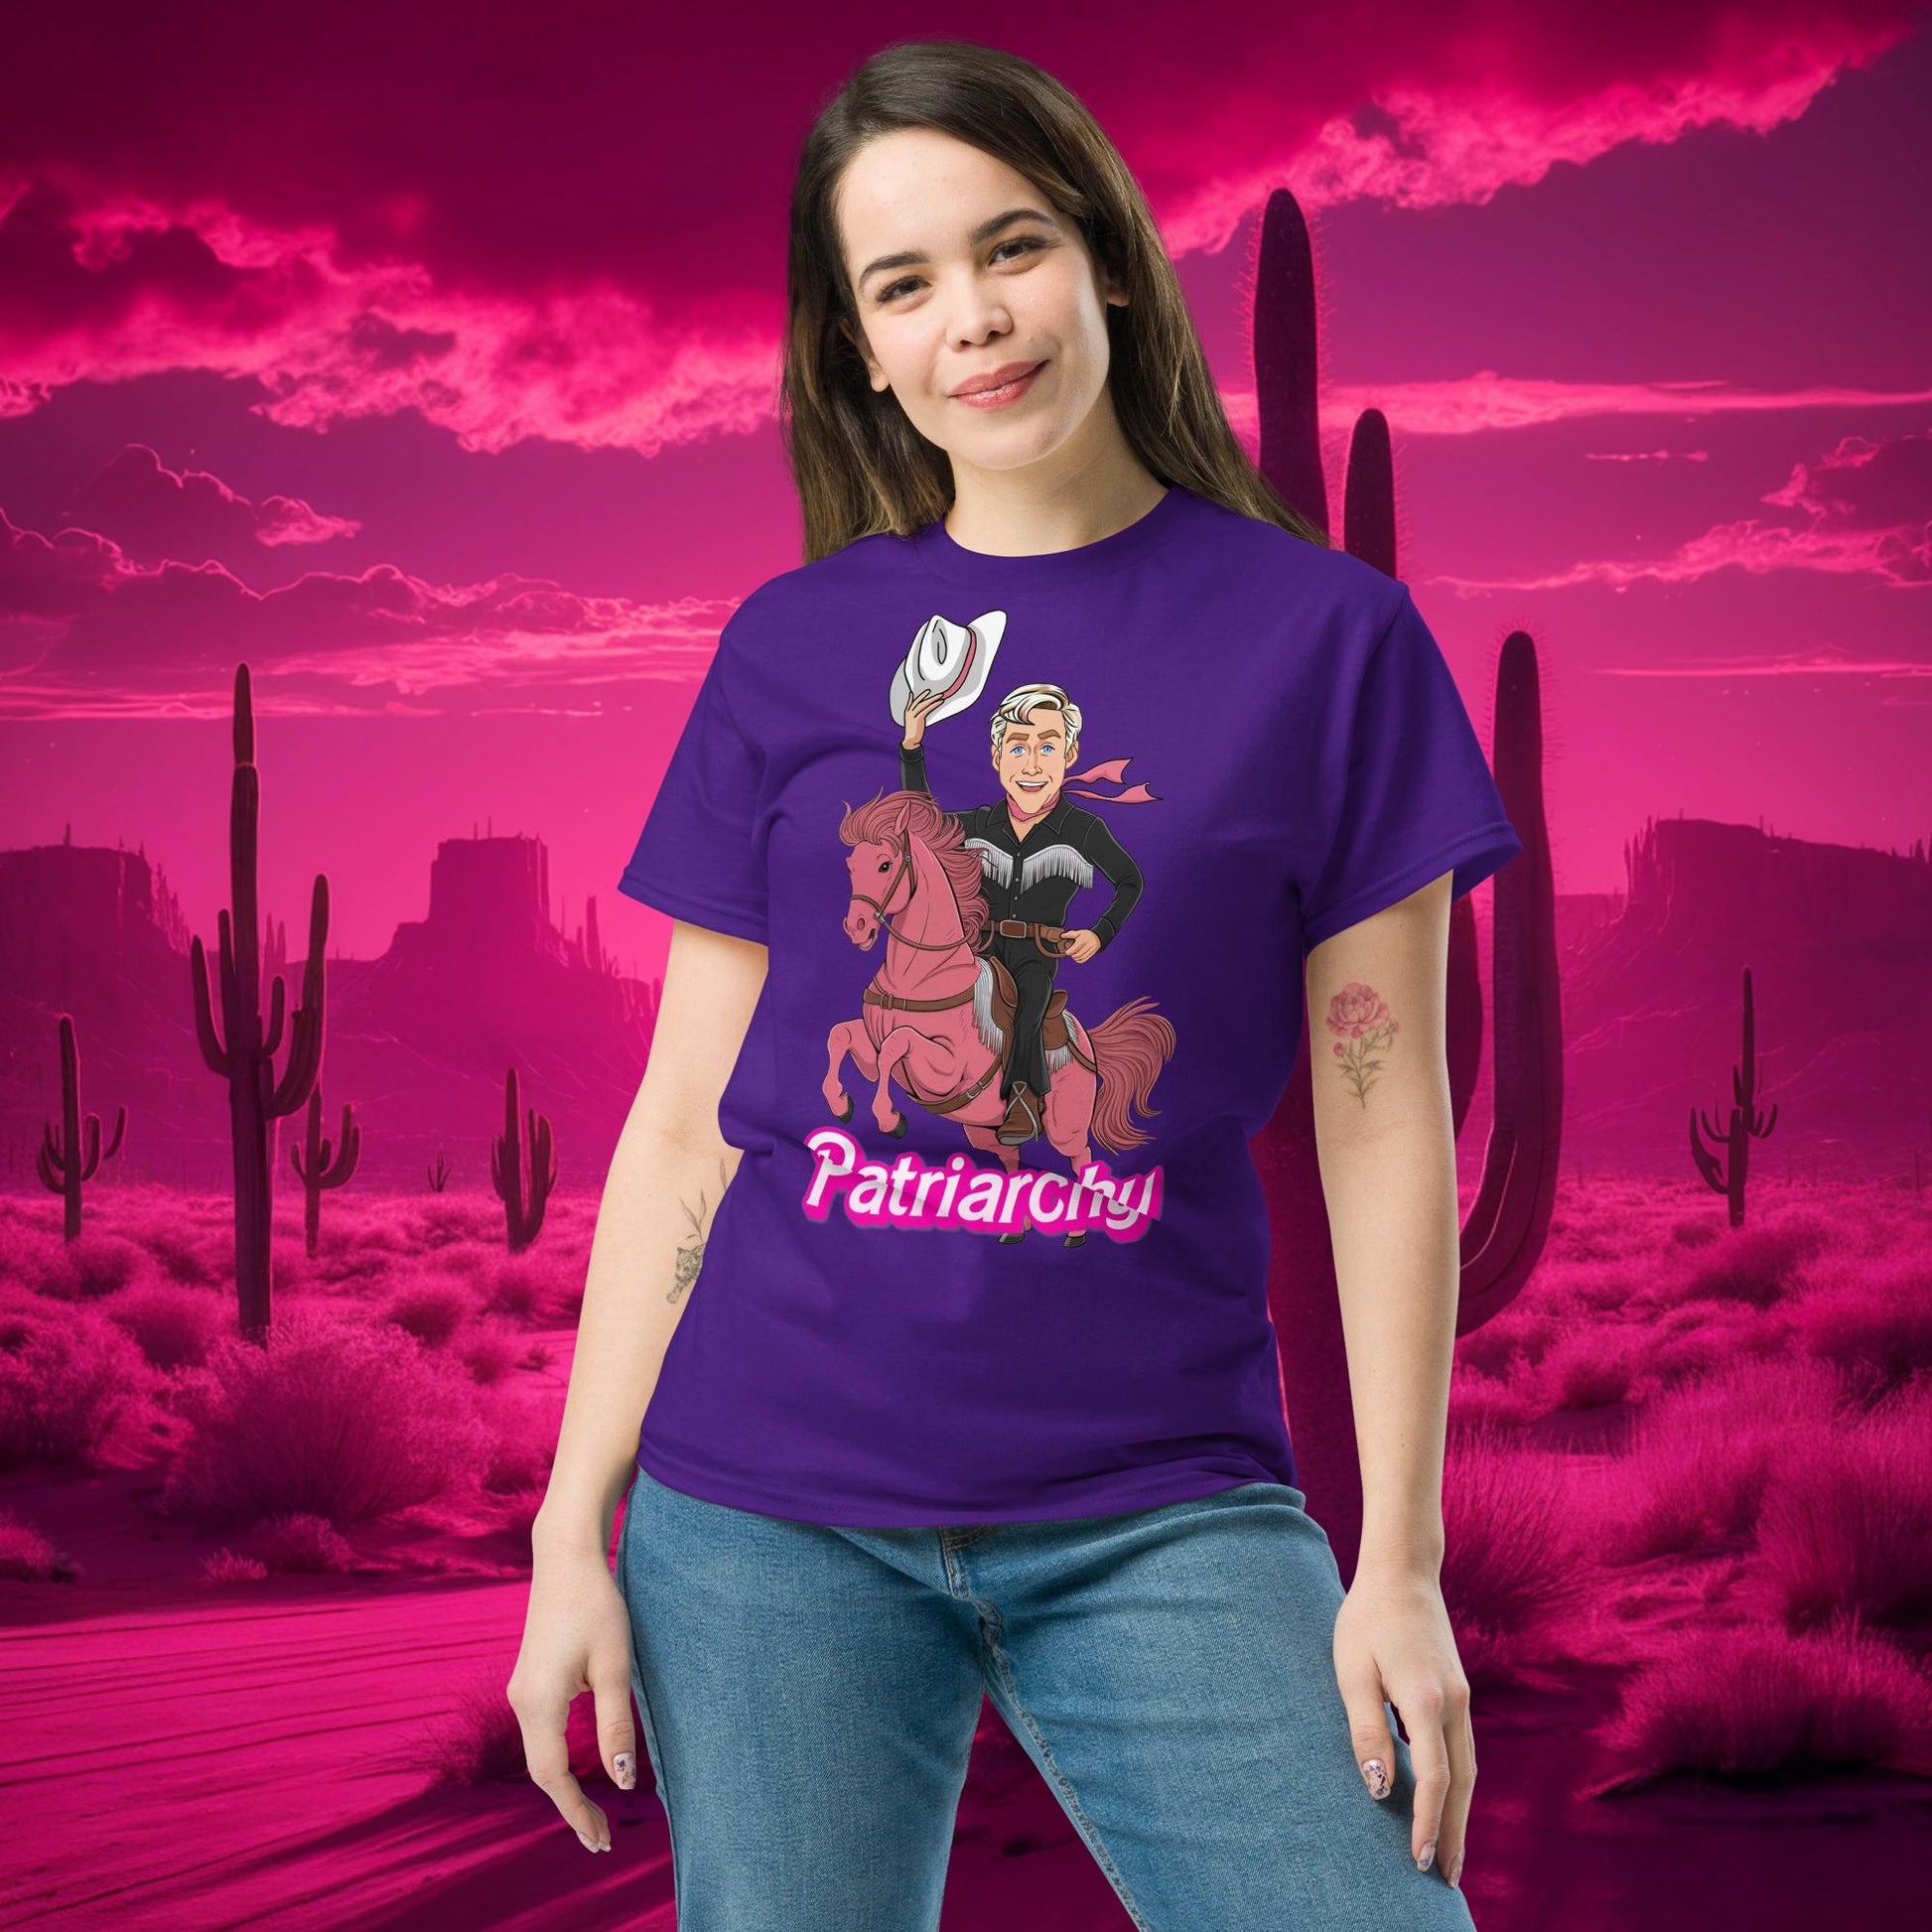 Ken Barbie Movie When I found out the patriarchy wasn't just about horses, I lost interest tee Next Cult Brand